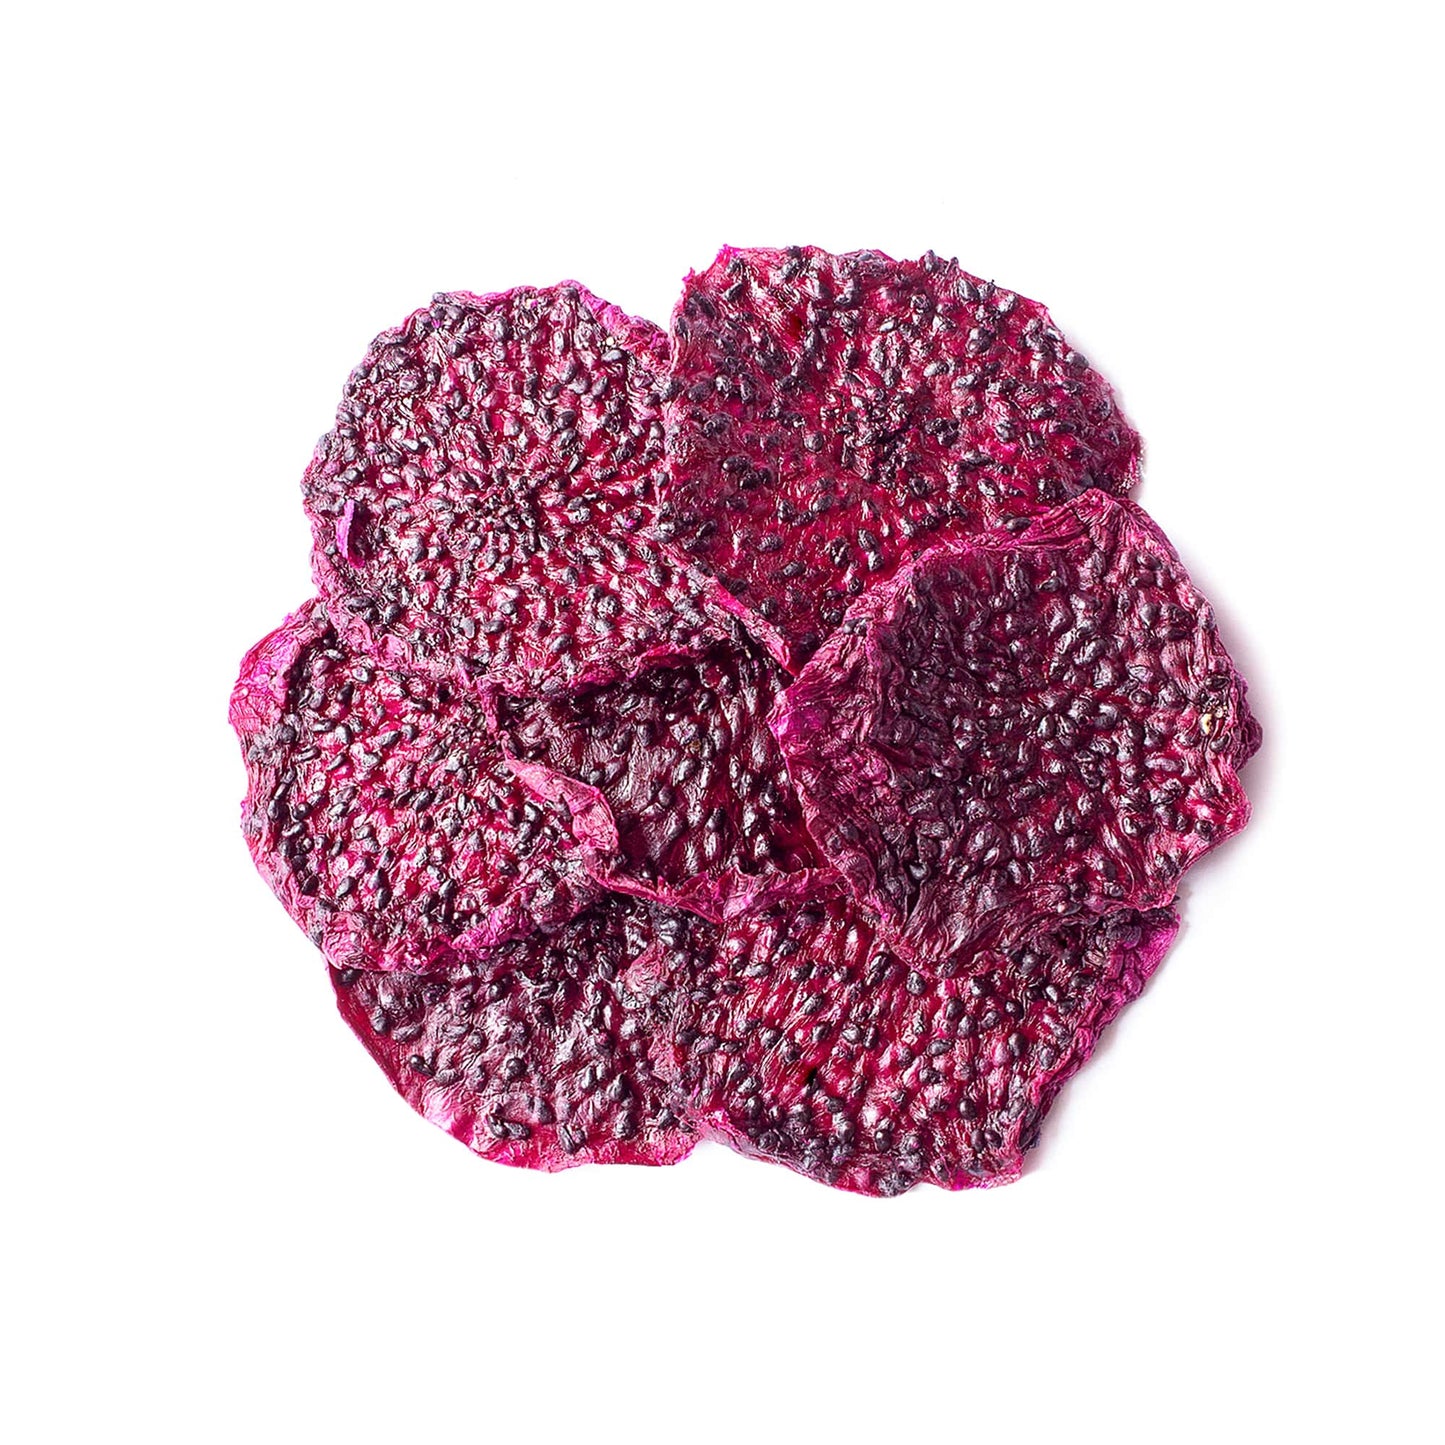 Red Dragon Fruit Slices – Dried Pitaya Chips, Vegan Superfood Snack, Dehydrated Dragonfruit is Rich in Vitamins, Minerals, and Antioxidants. Raw Pink Pitahaya in Bulk